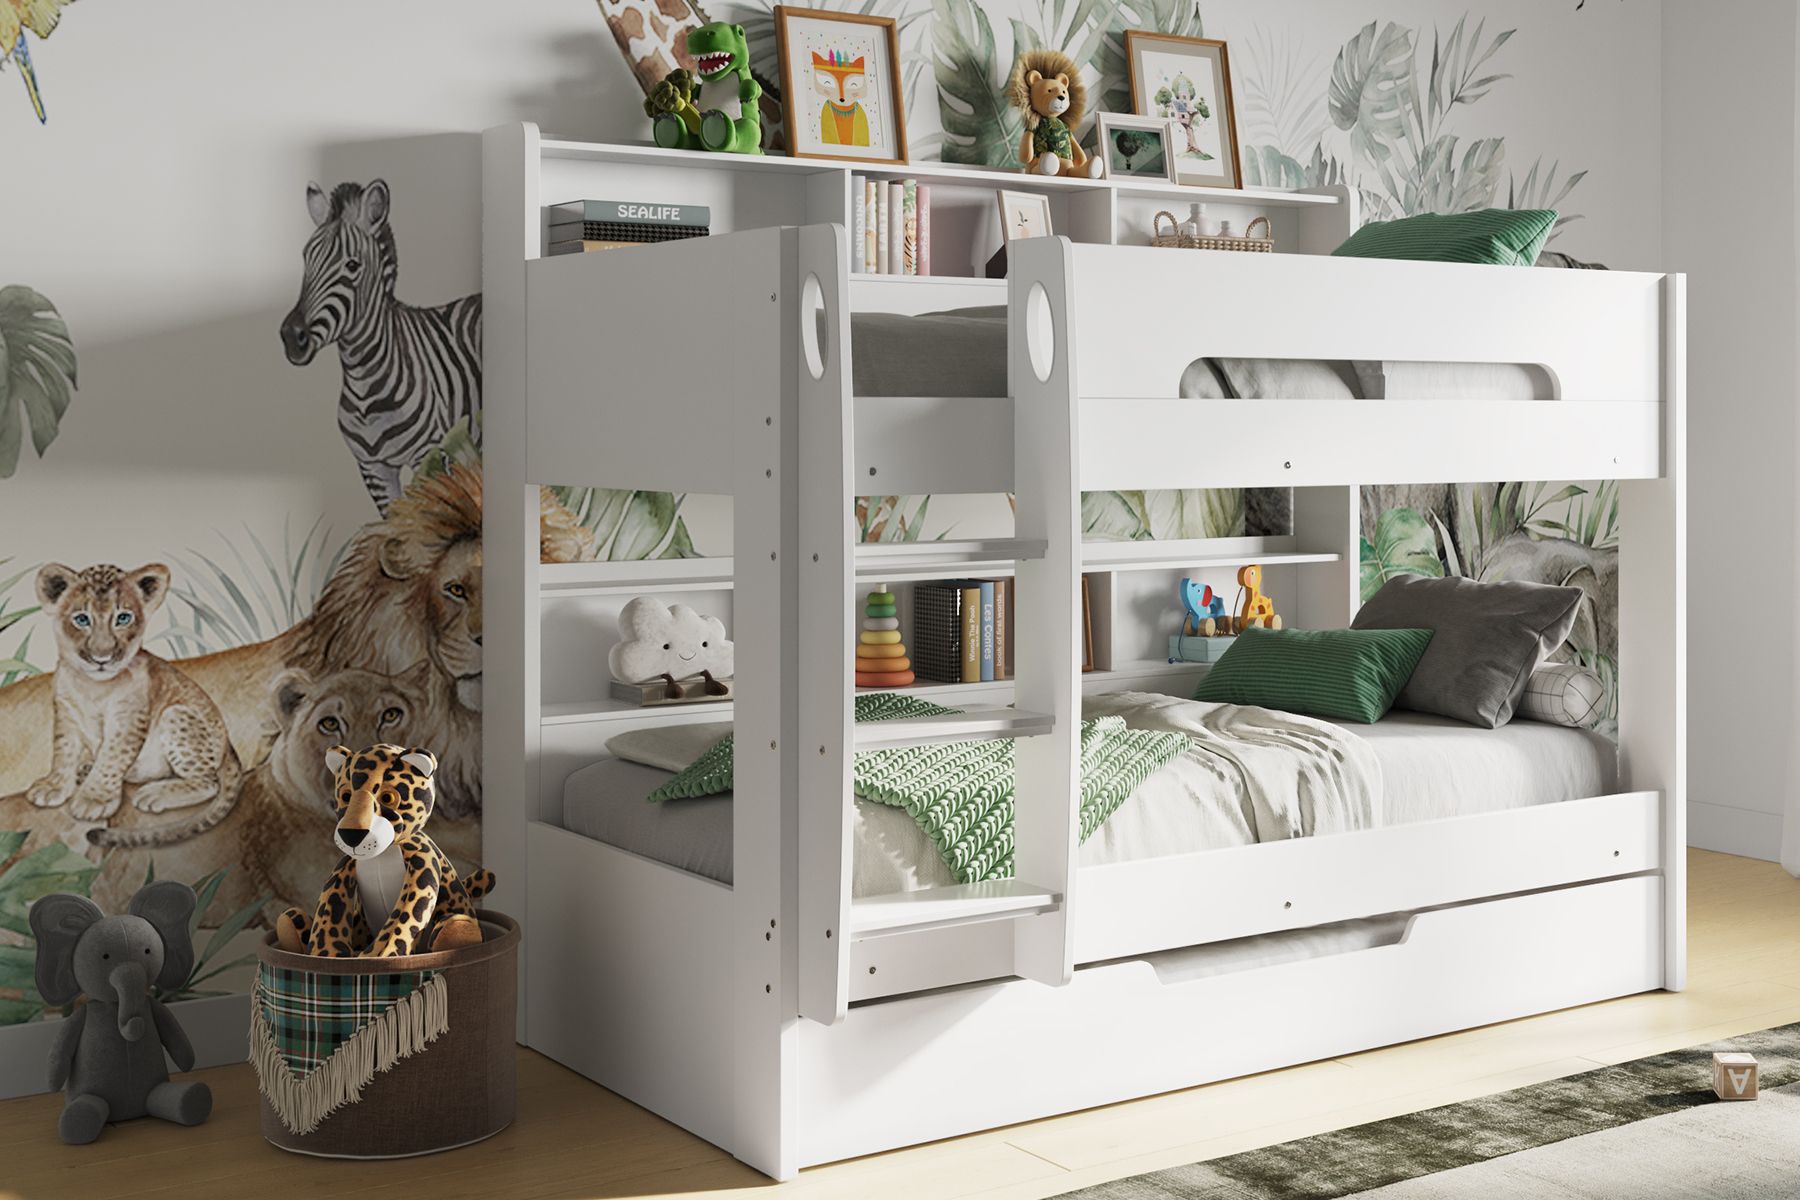 Flair Interstellar Bunk Bed with Shelving - White